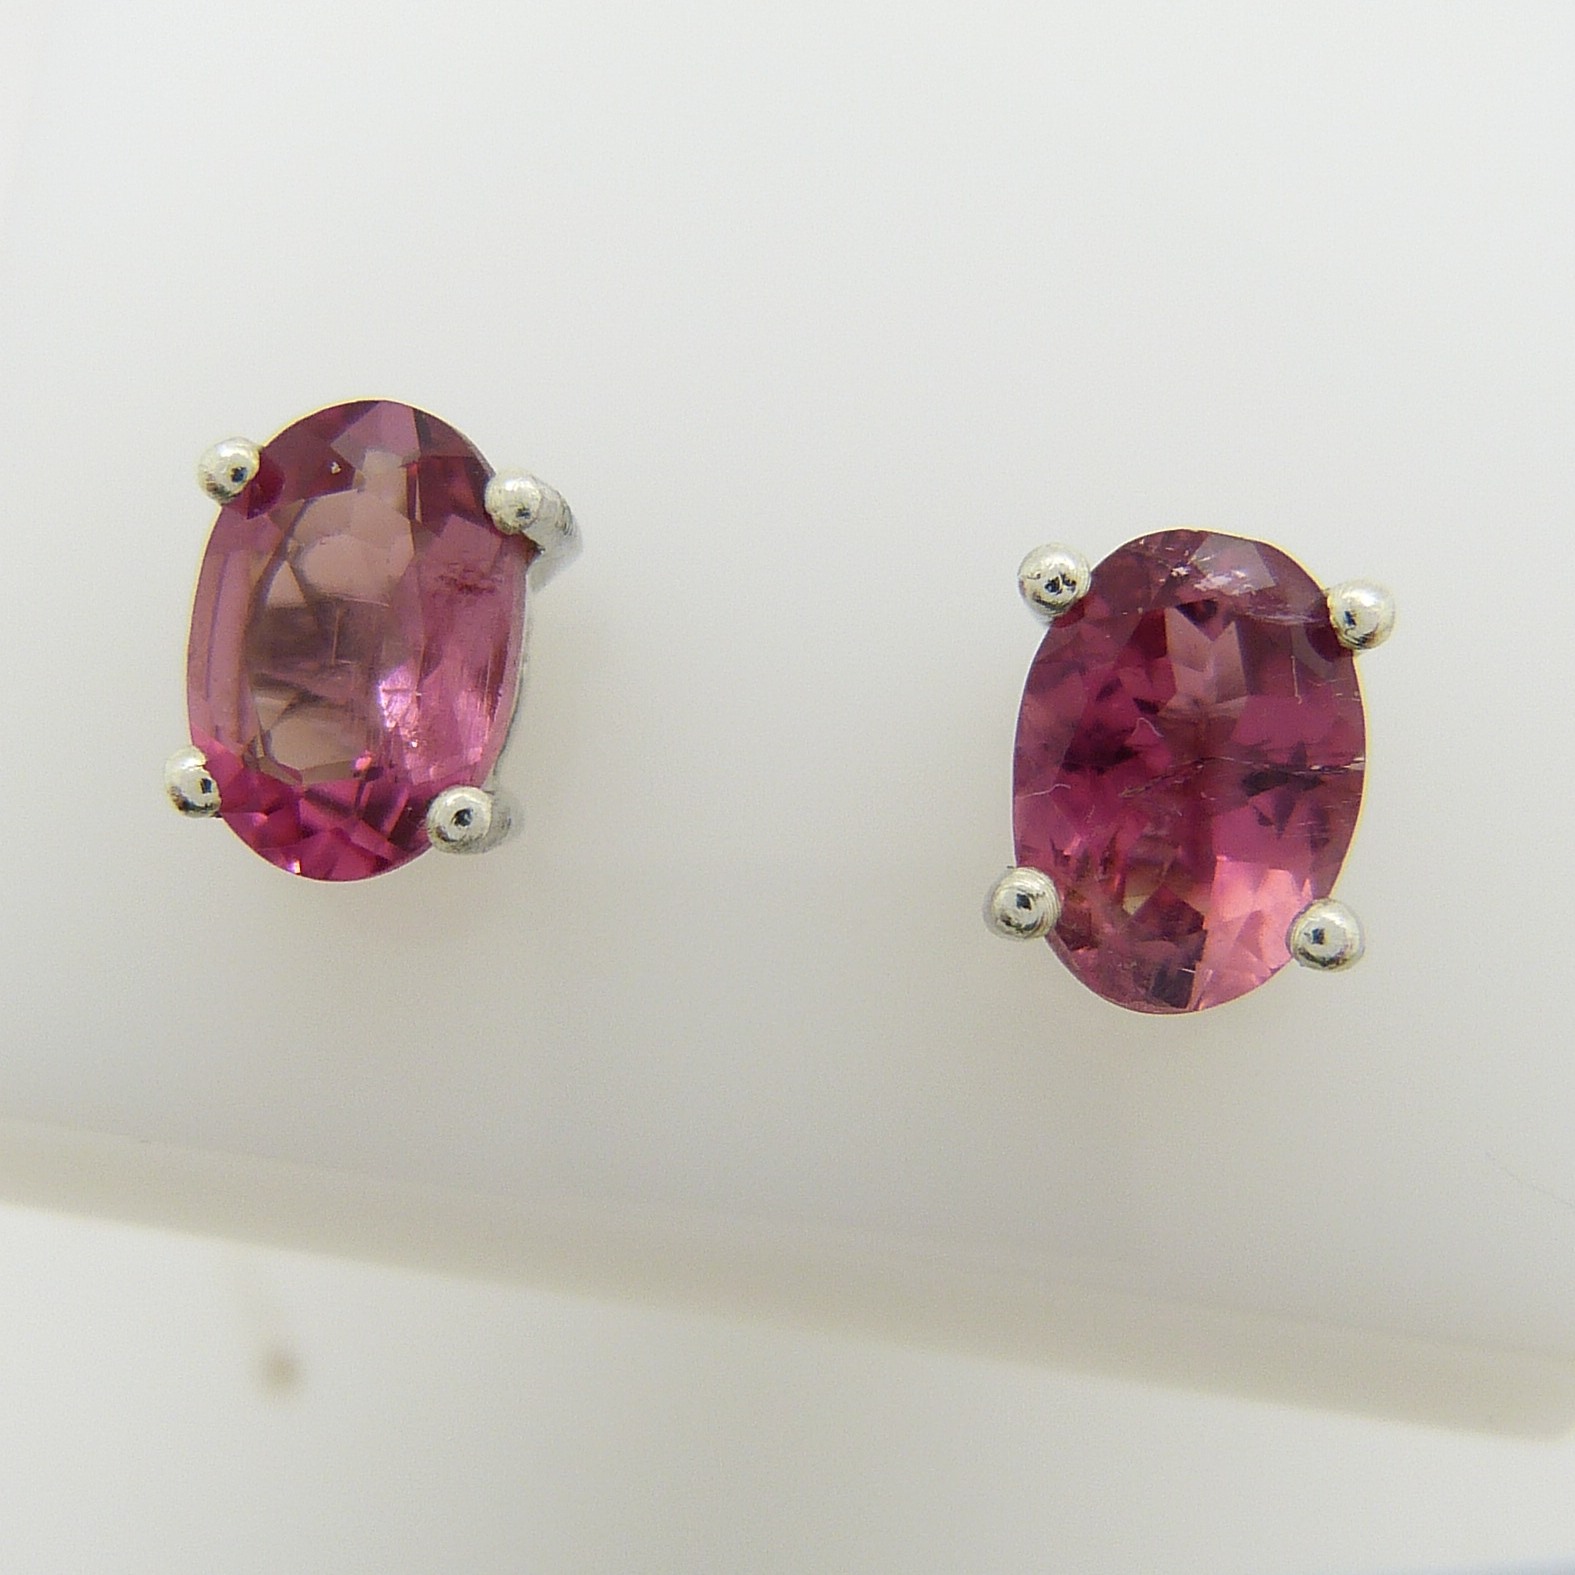 A pair of silver ear studs set with pink tourmalines, 1.30 carats (approx). - Image 3 of 5